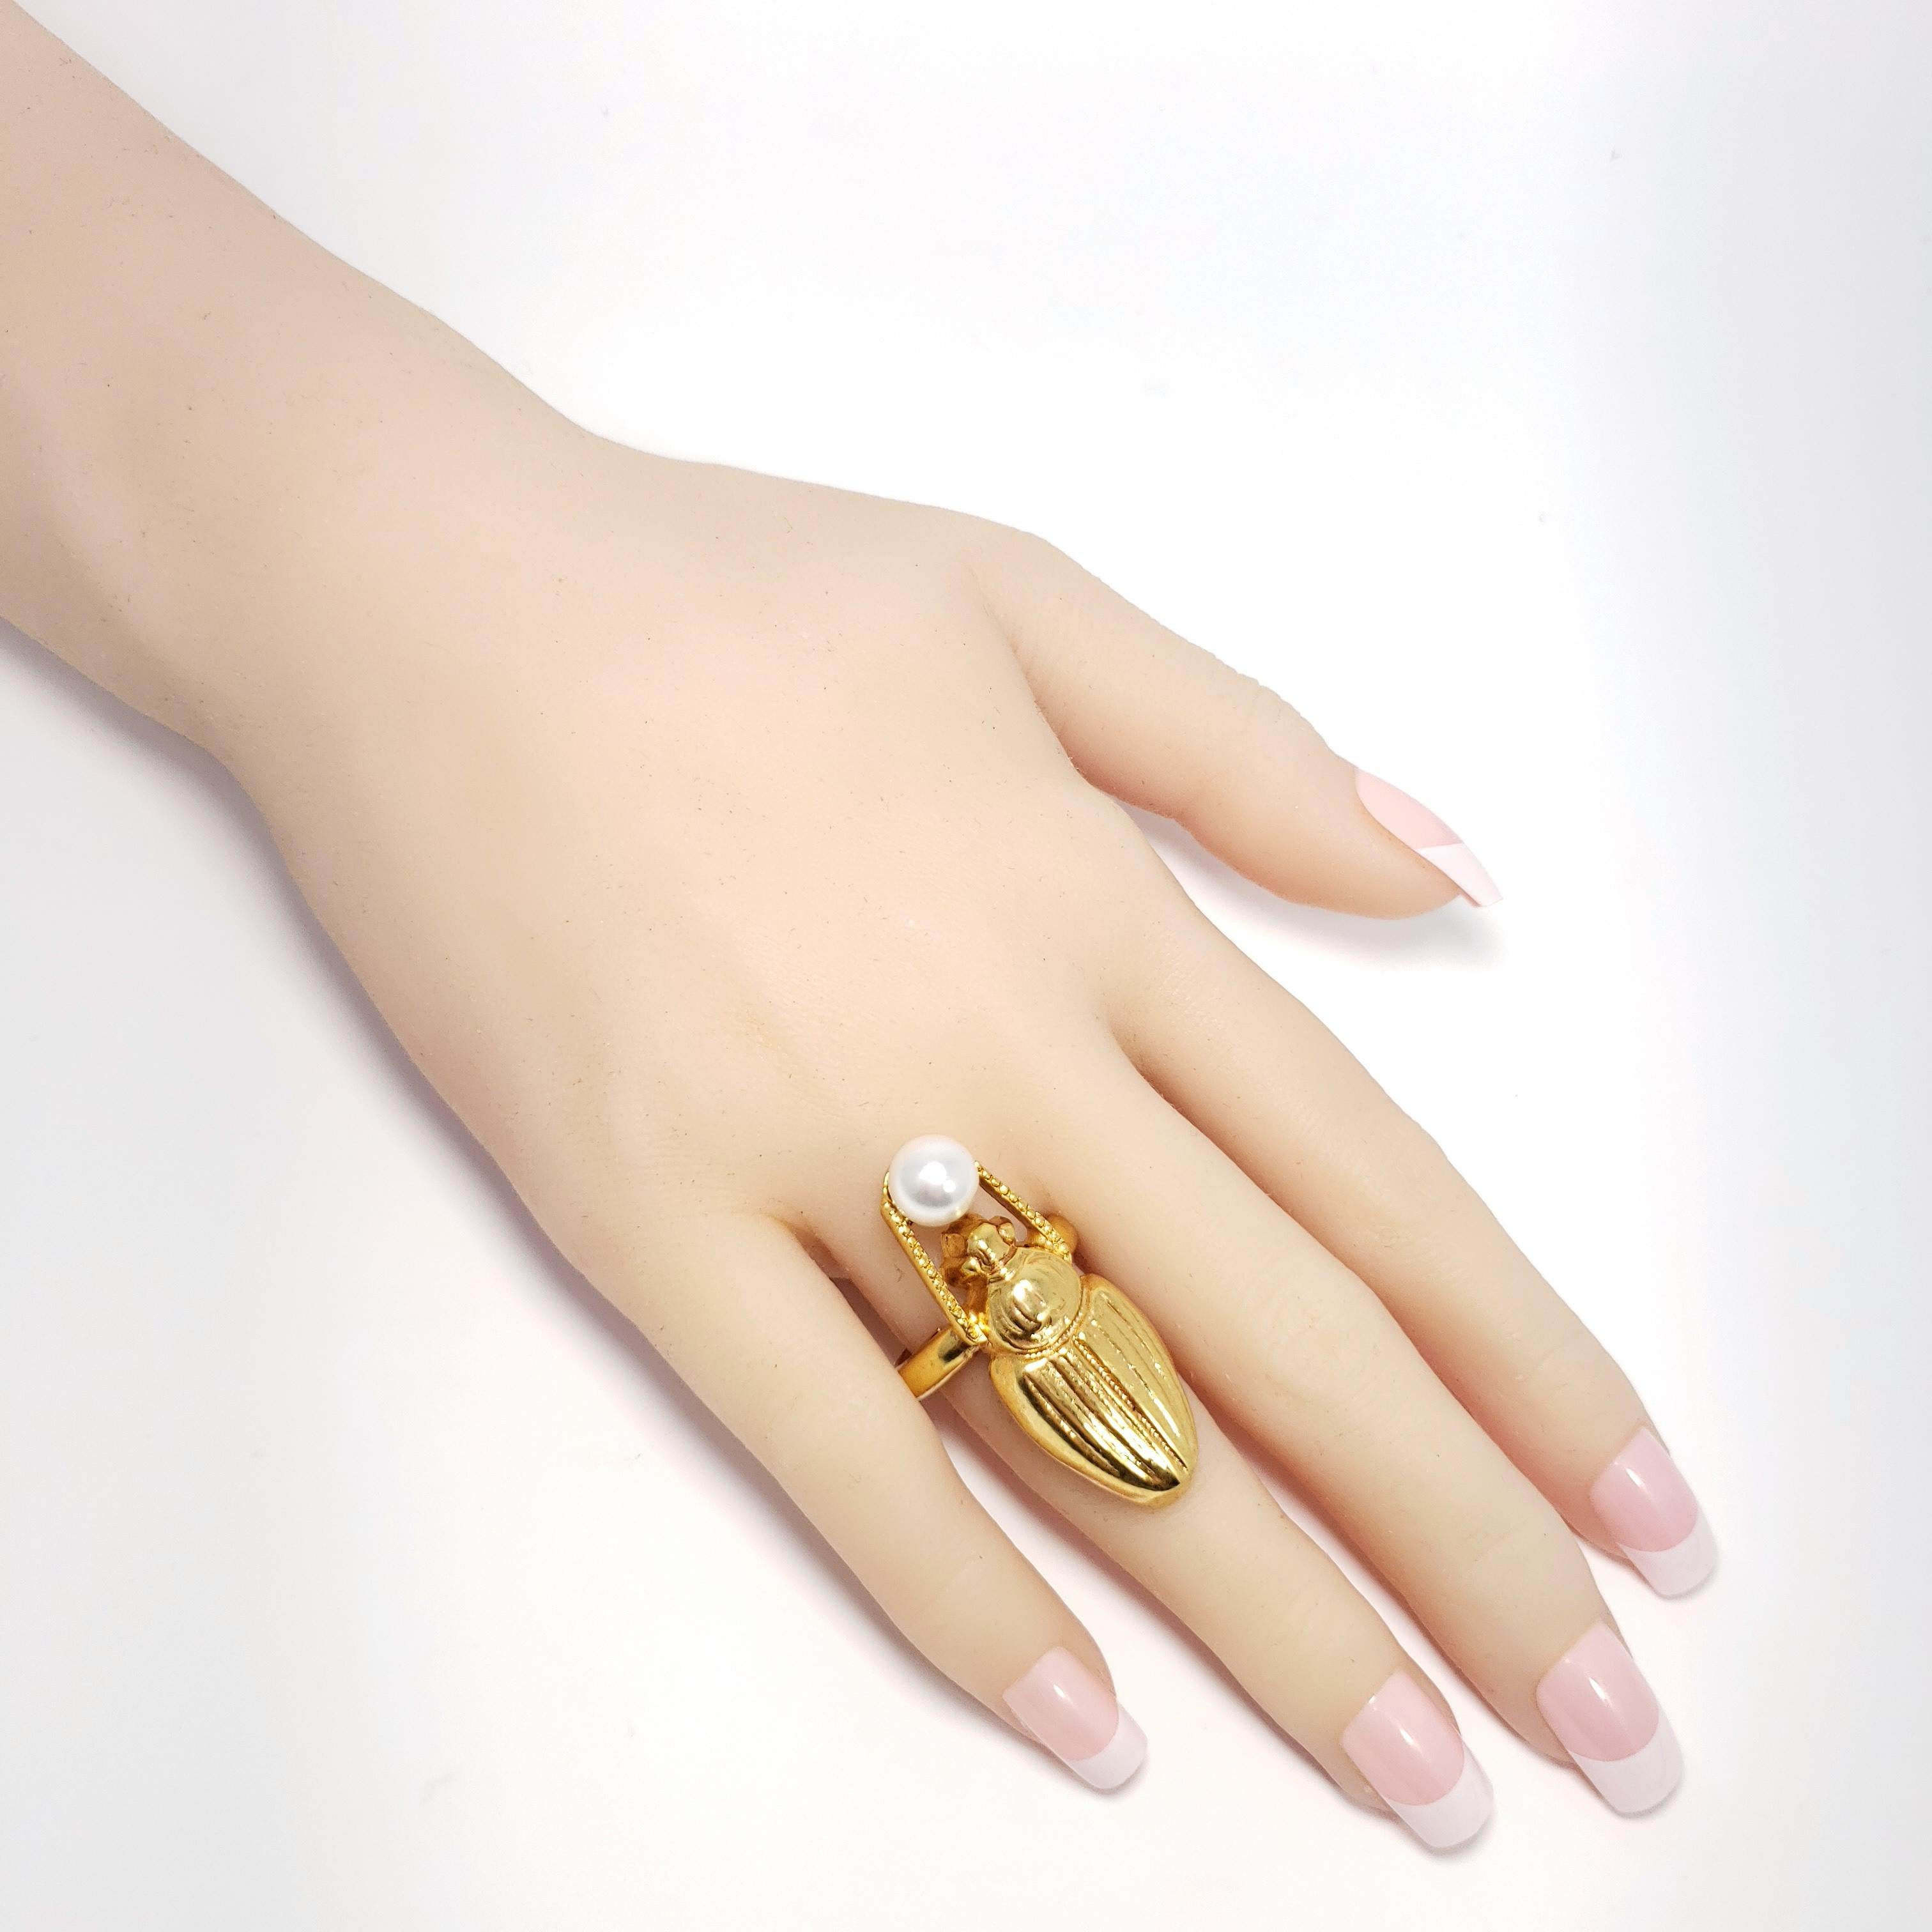 Oscar de la Renta cocktail ring, featuring a polished gold scarab accented with a single faux pearl.

Adjustable sizes 5 to 8.5

Tags, Marks, Hallmarks: Oscar de la Renta, Made in USA
